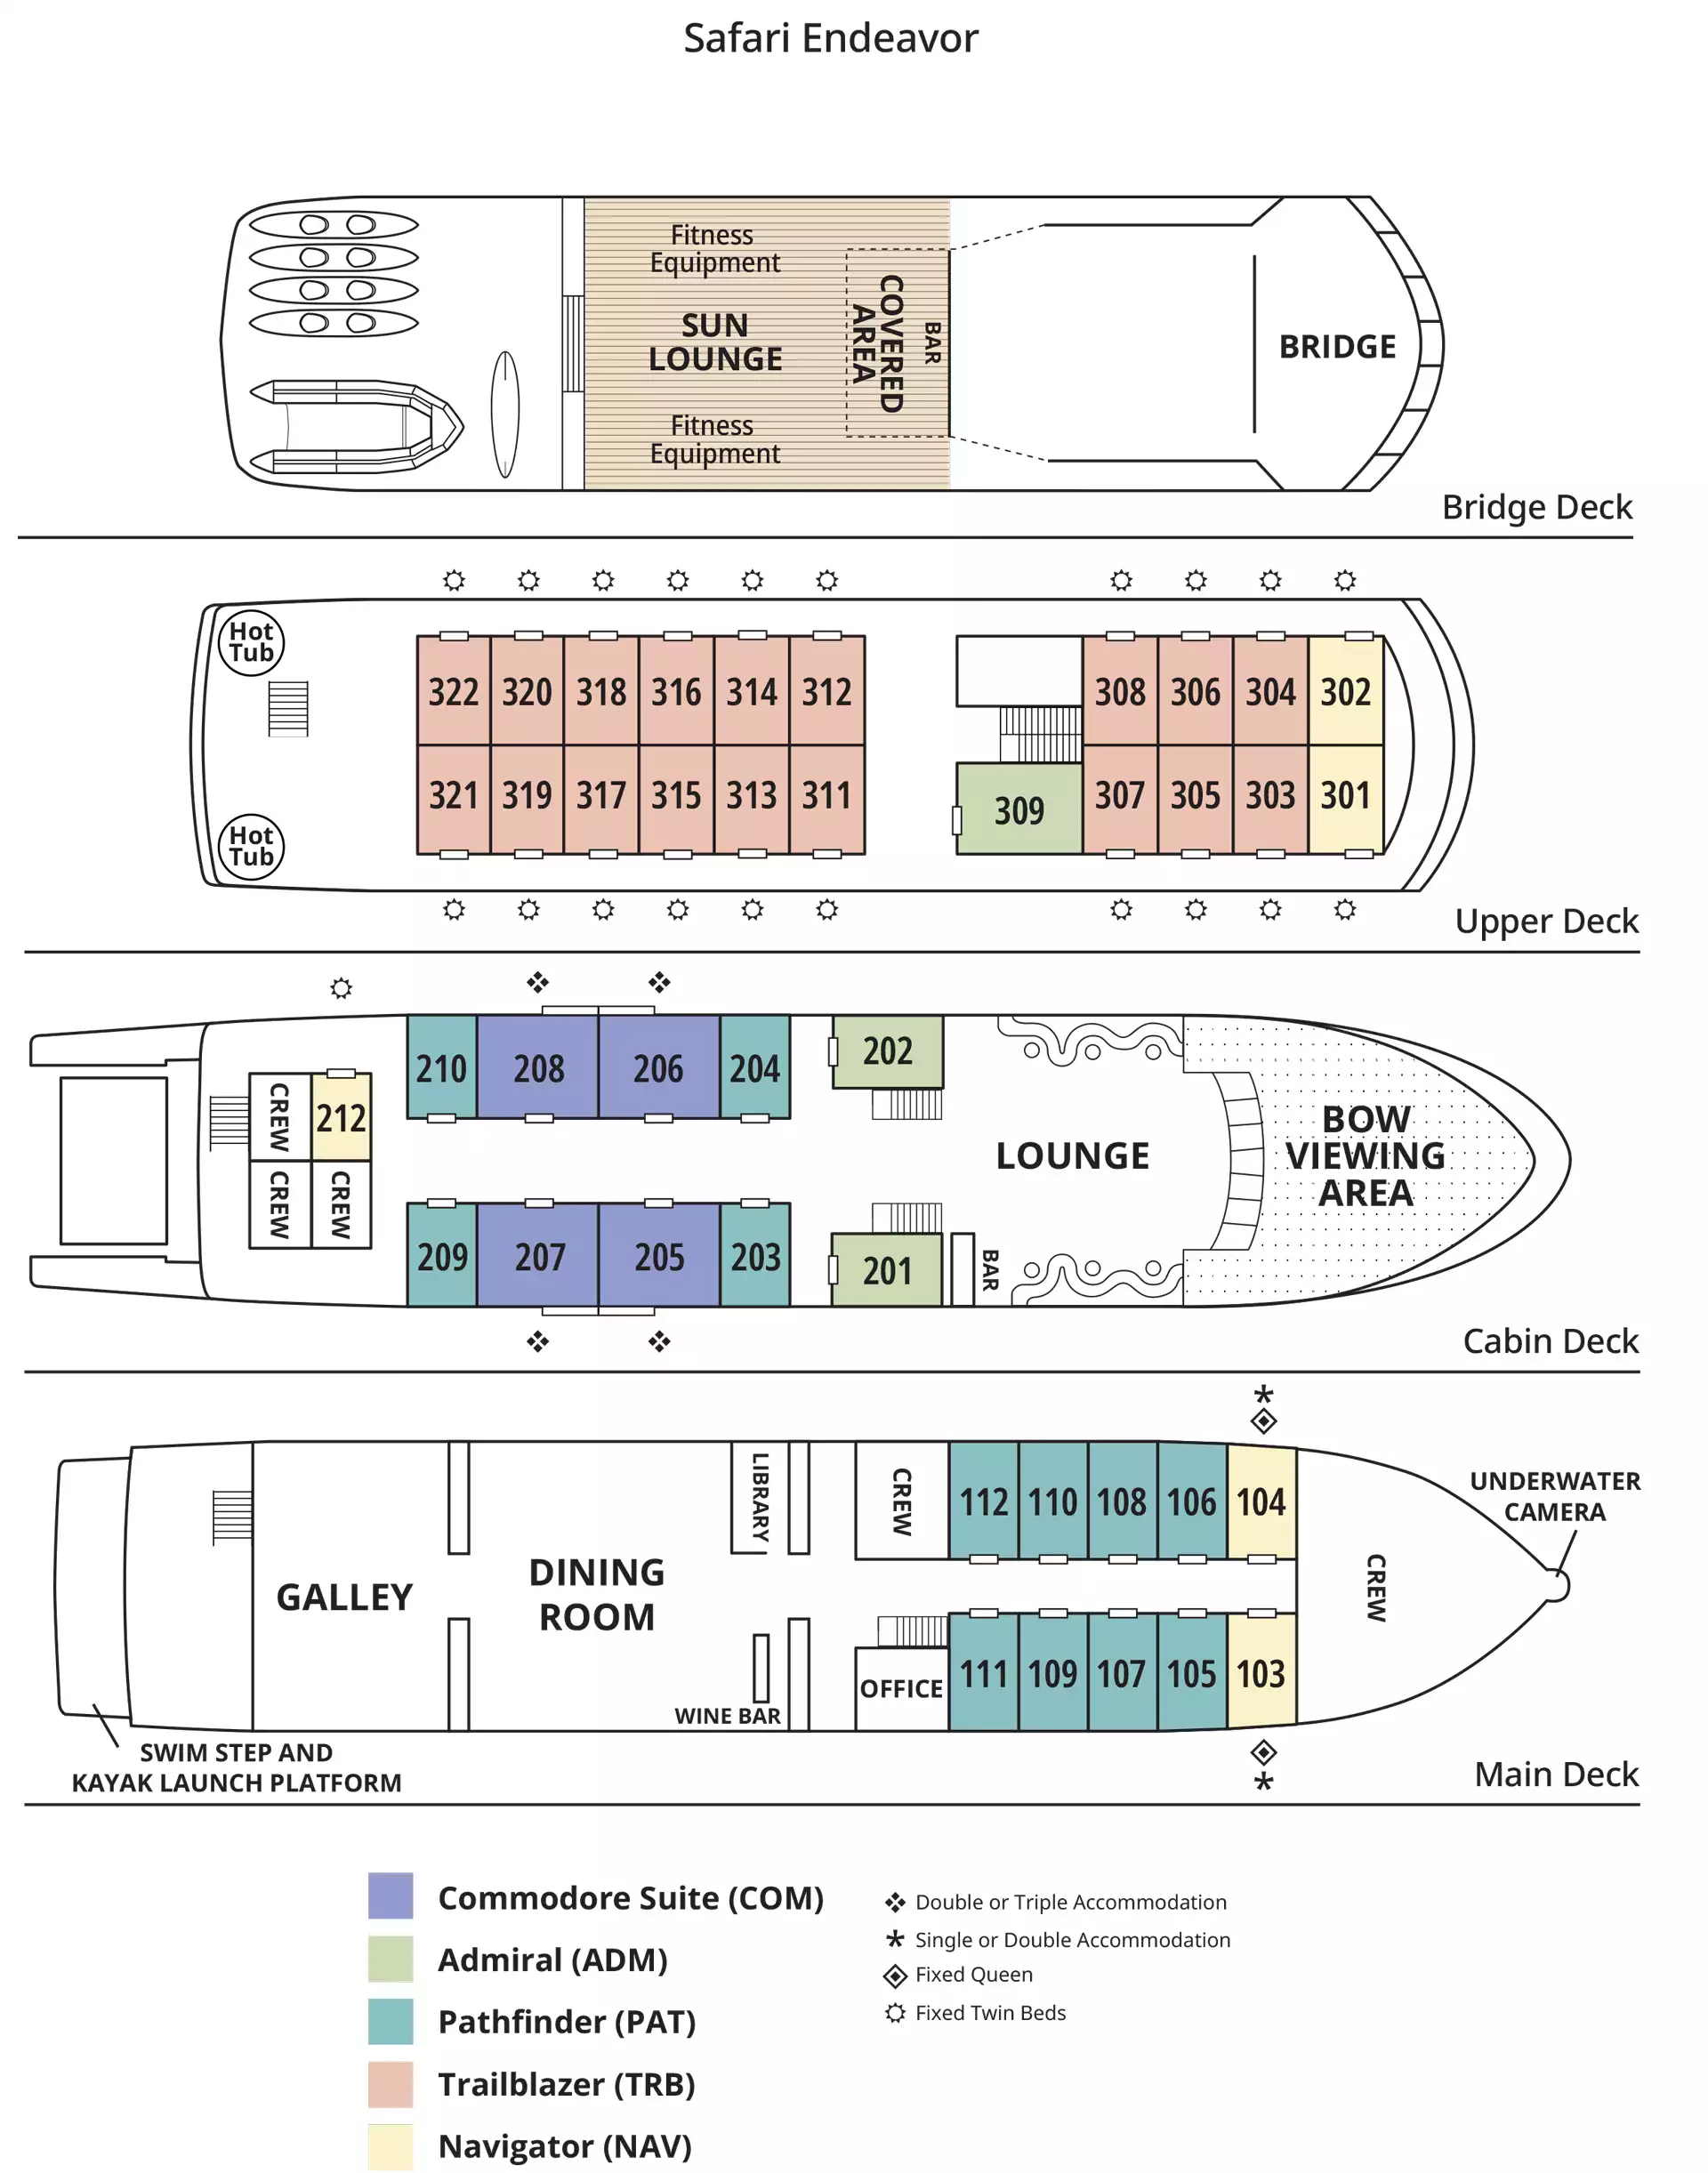 Deck plan of Safari Endeavour small ship with 4 guest decks, 5 cabin categories separated by color & bed configuration notes.